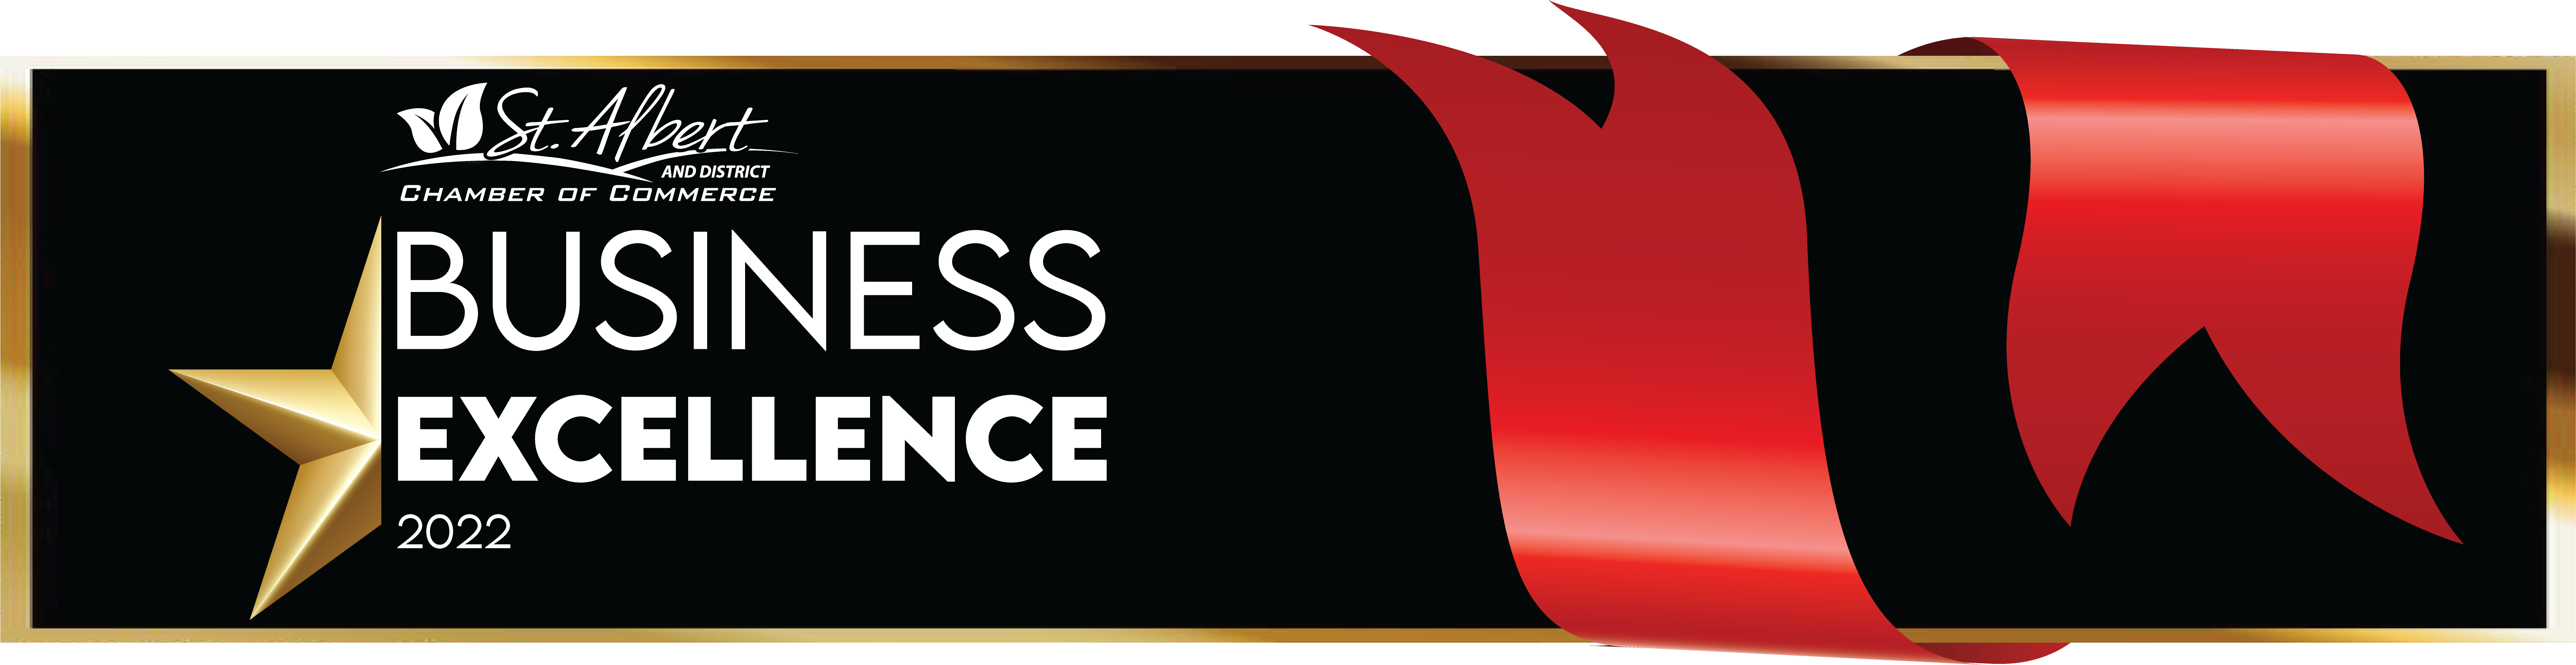 business excellence banner